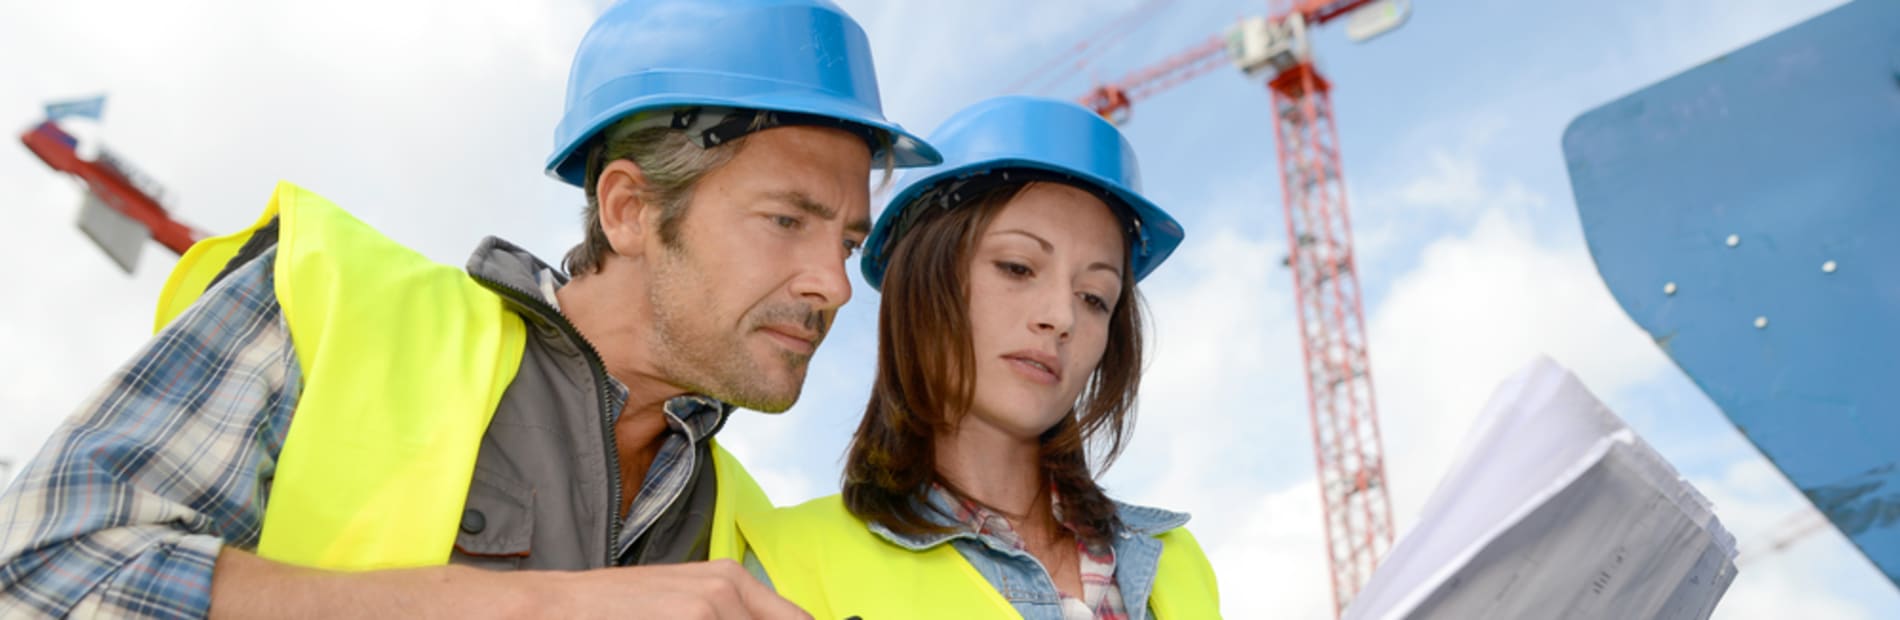 Man and woman on construction site